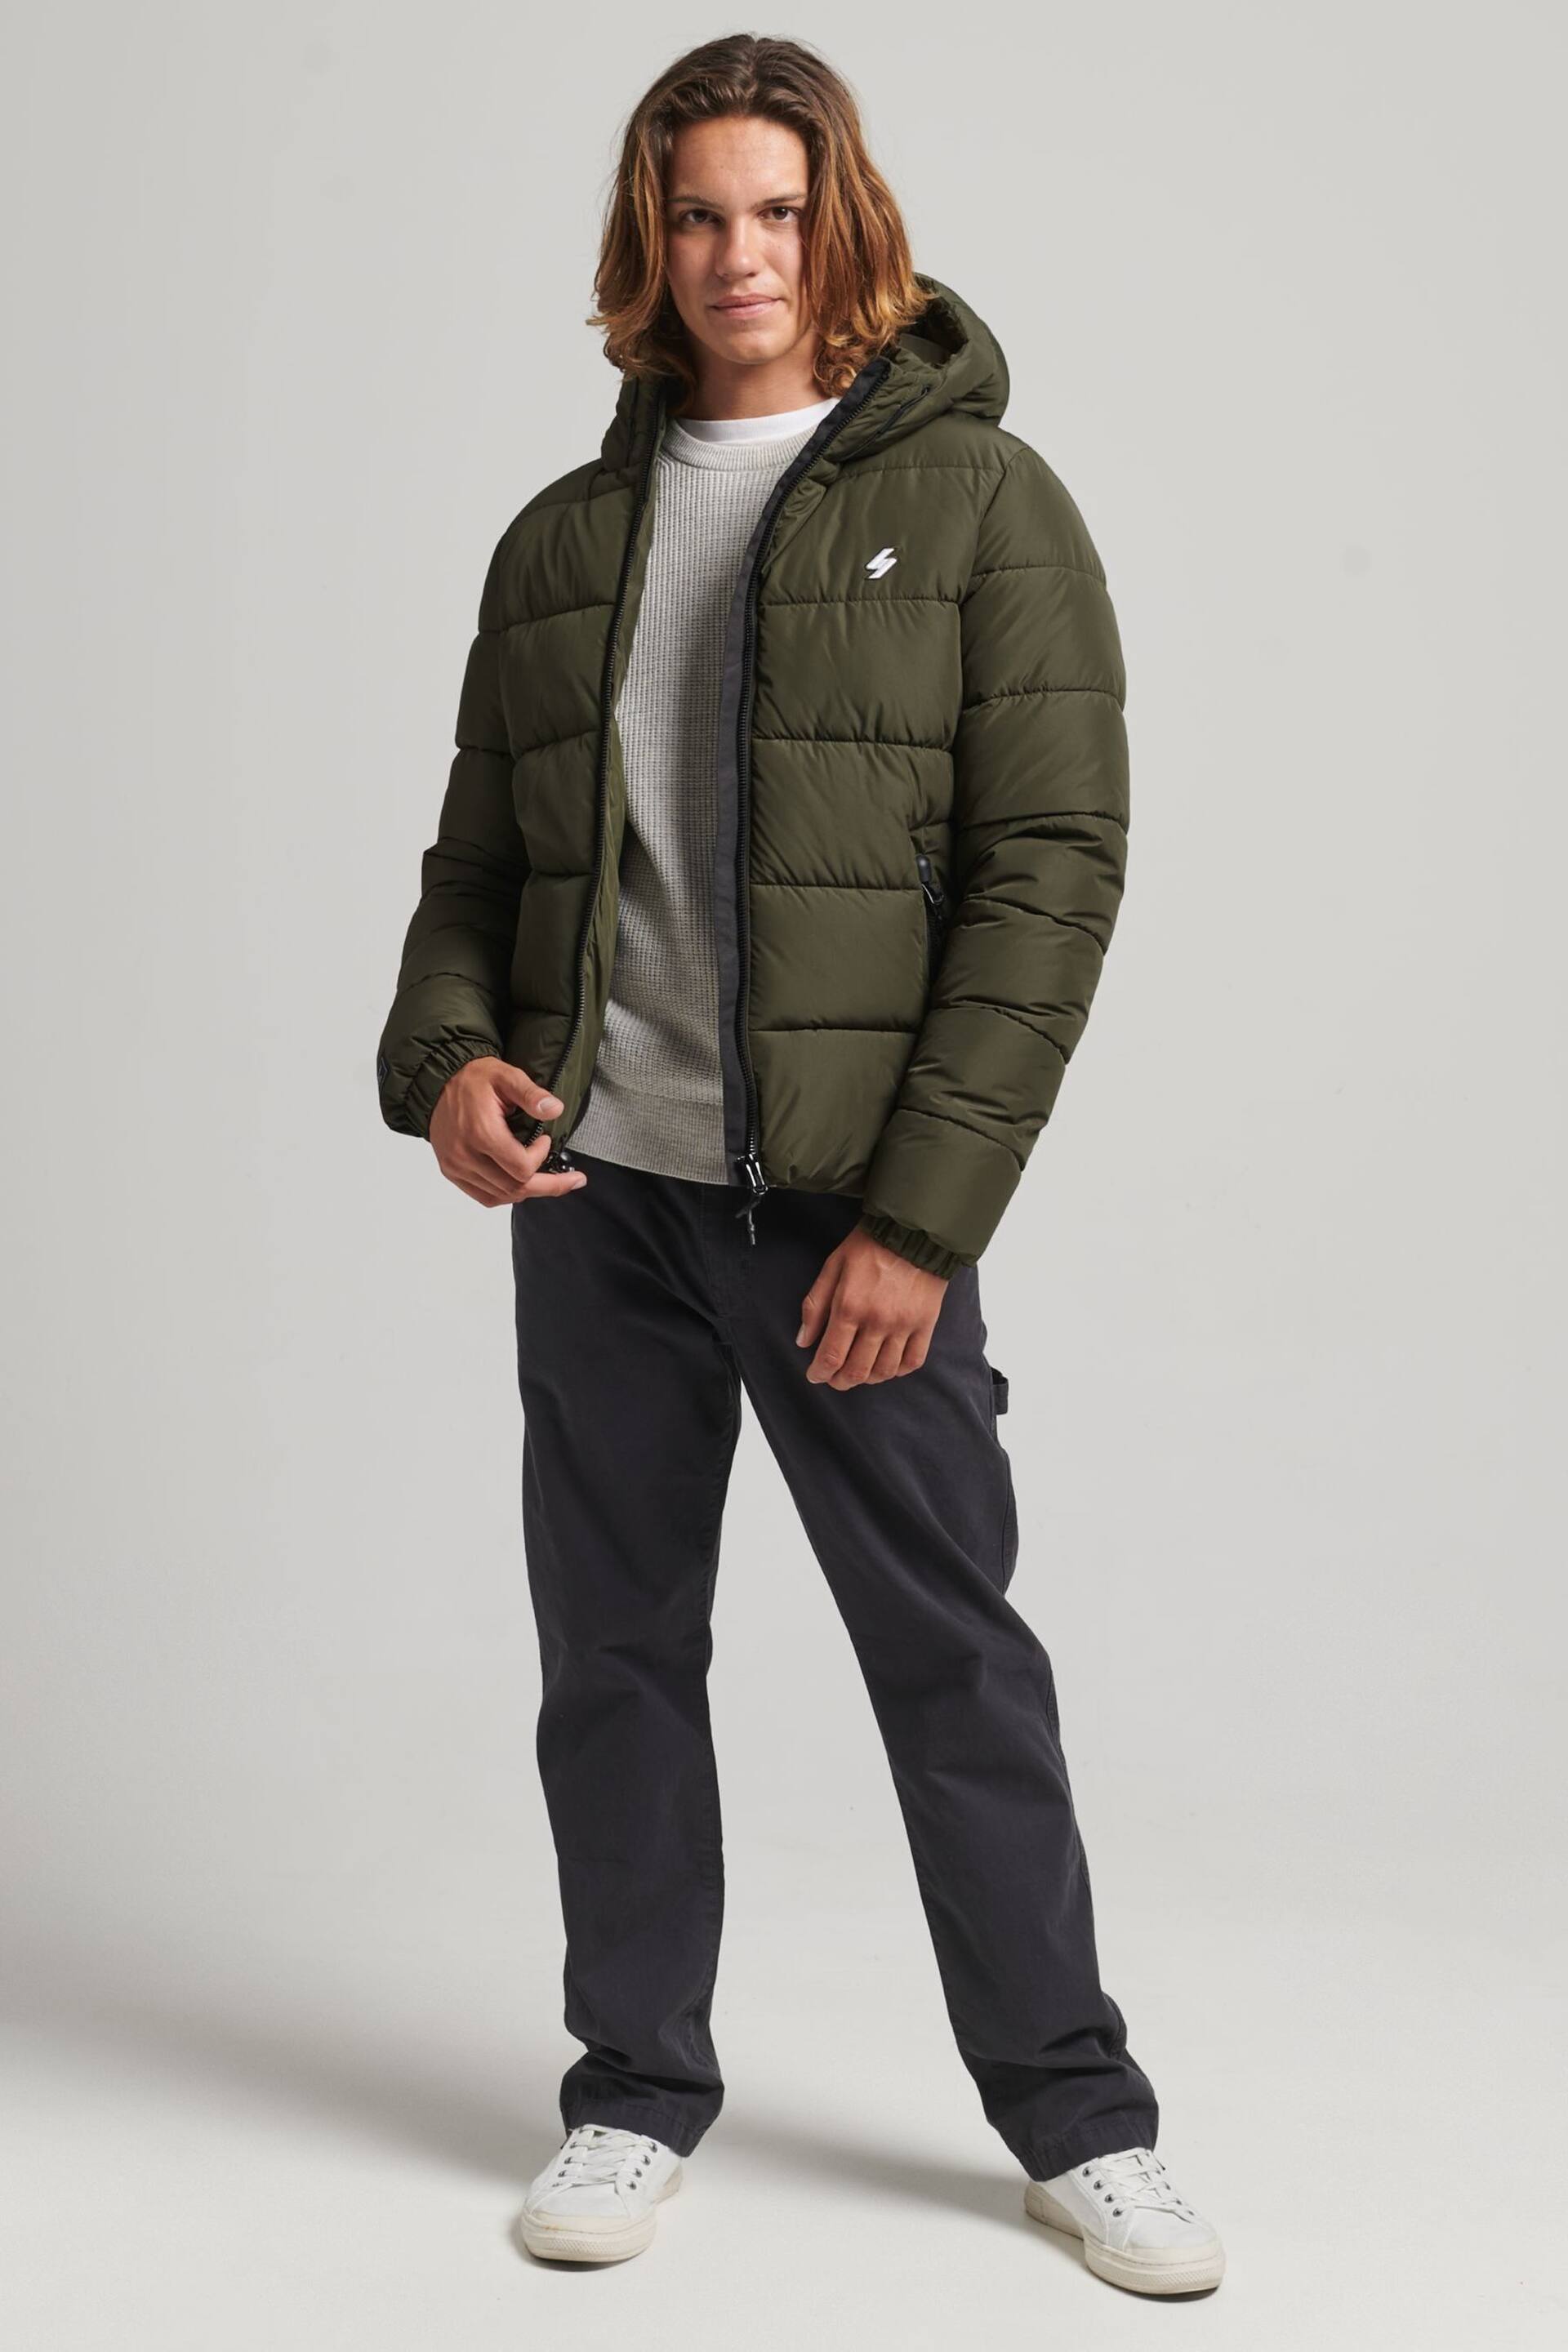 Superdry Dark Moss Hooded Mens Sports Puffer Jacket - Image 3 of 6